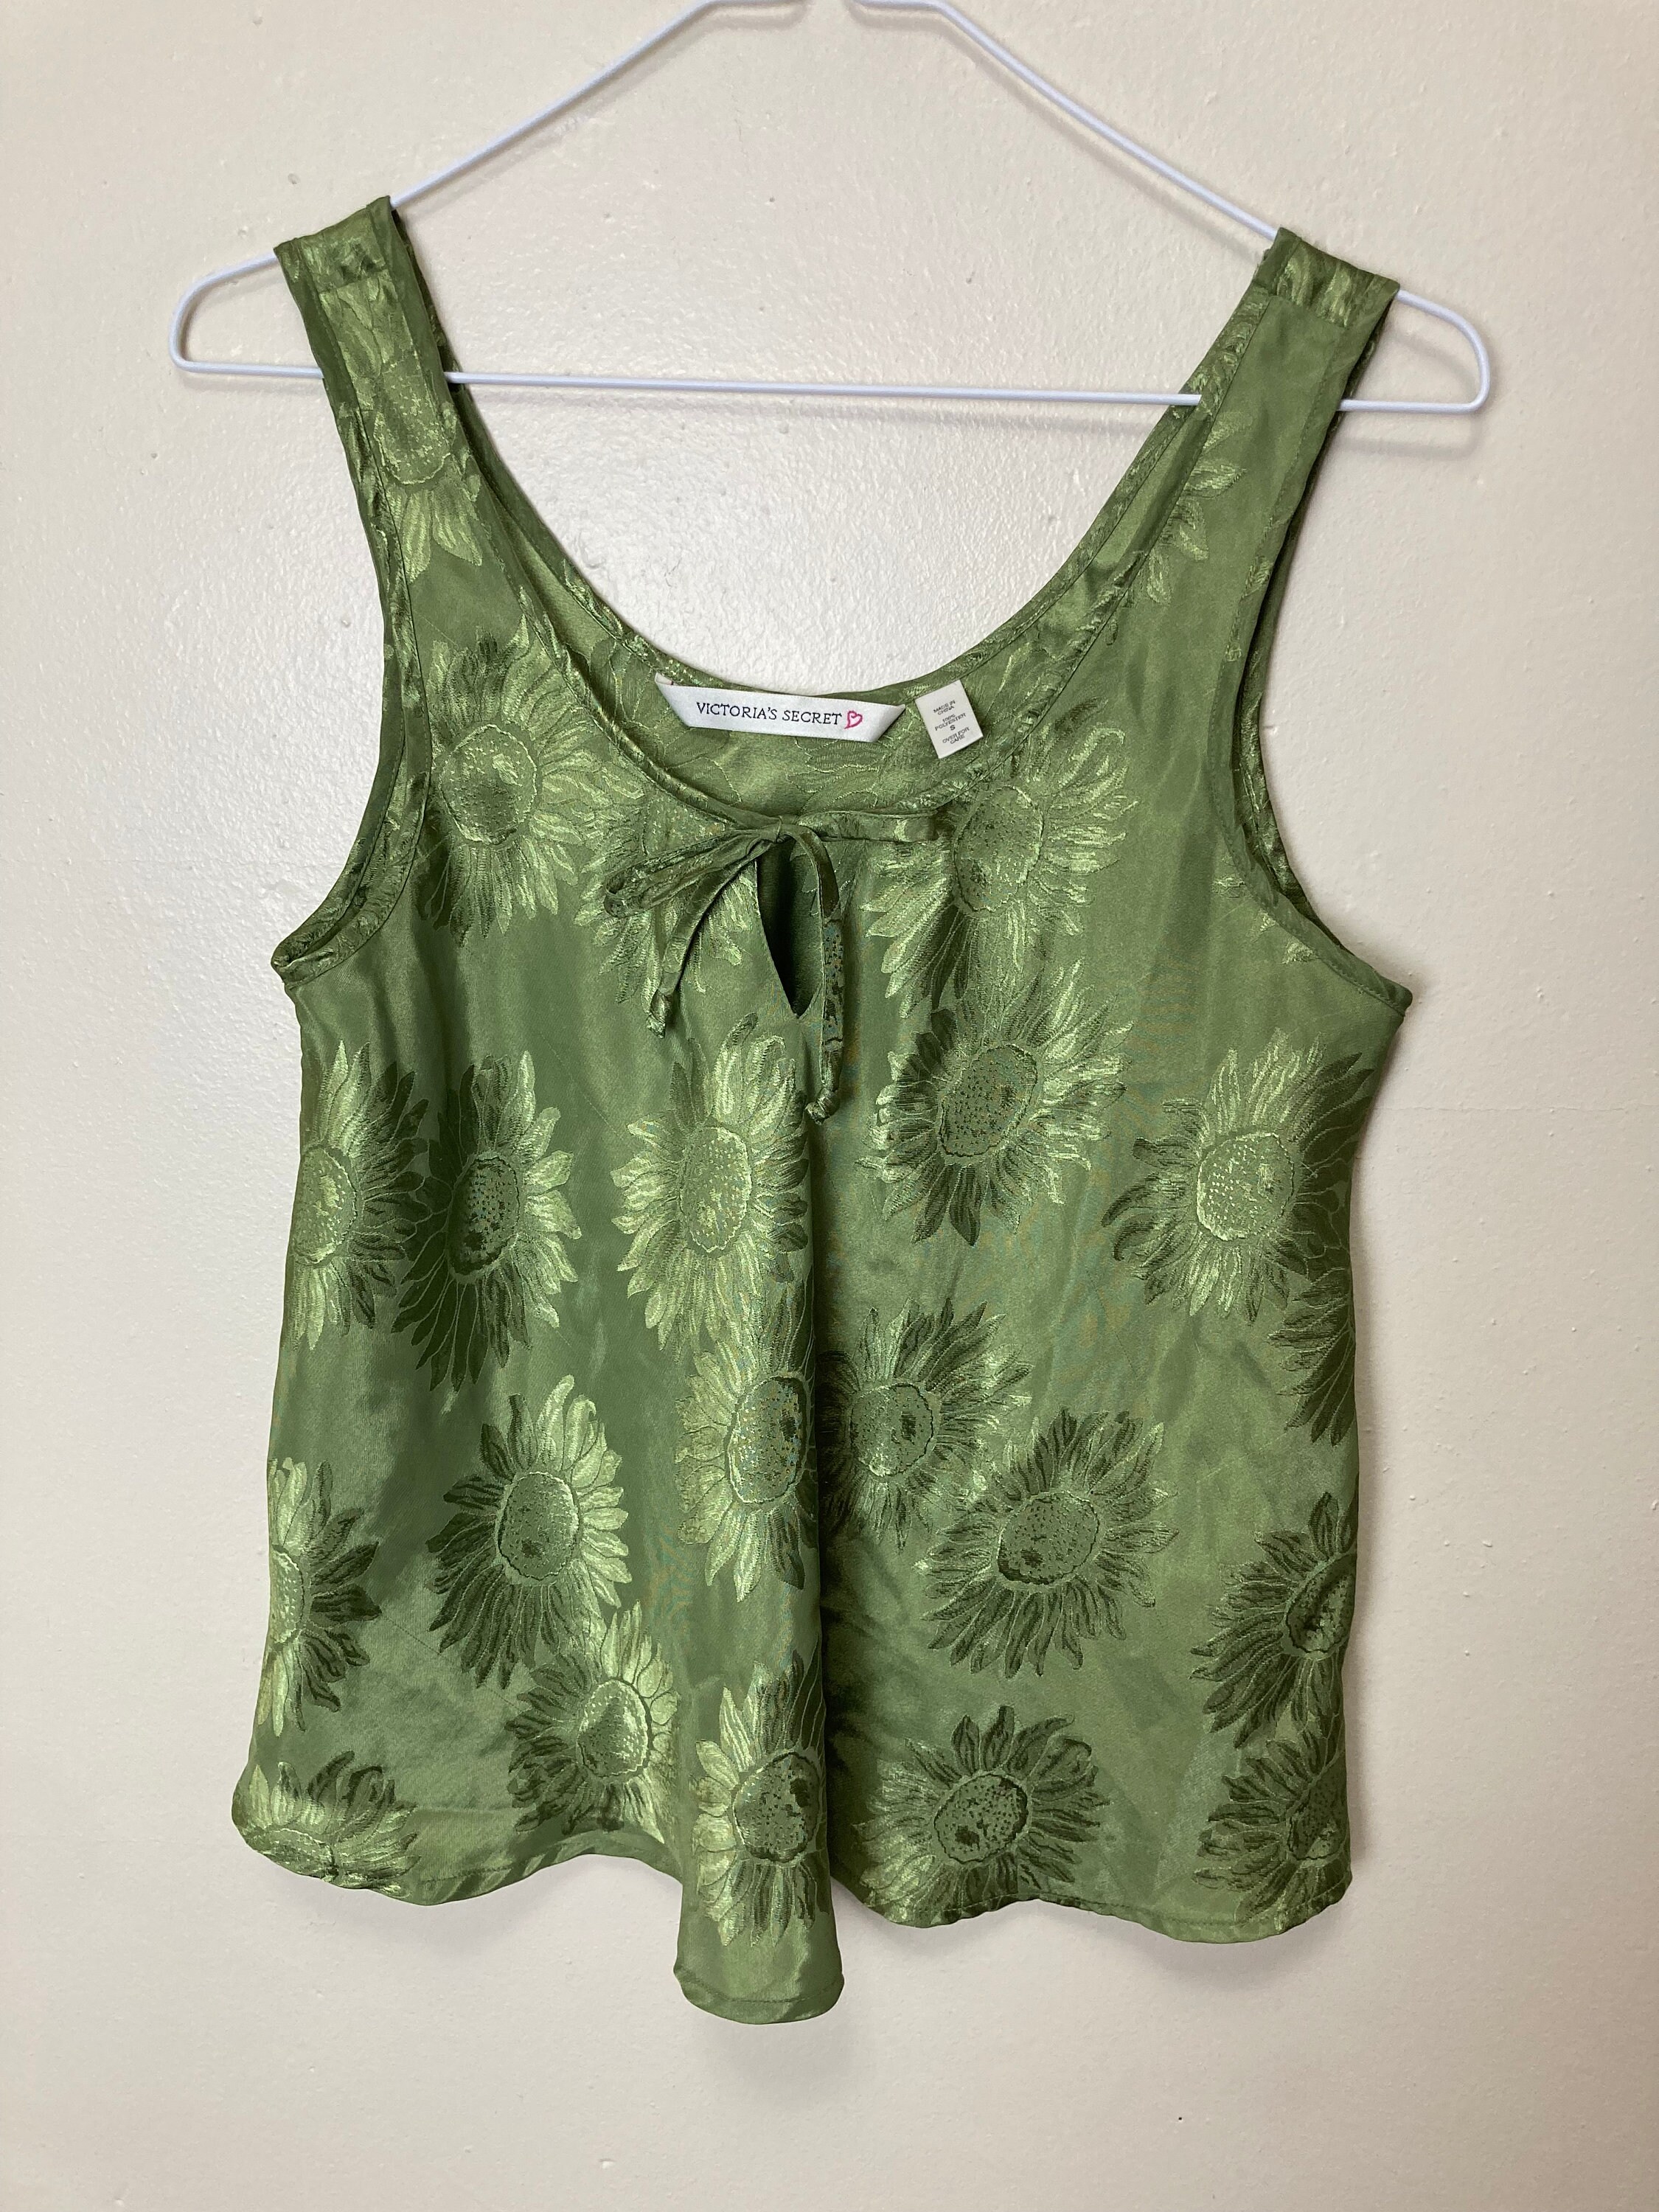 Lace Camisole, Olive Green Bralette, Camisole Top, Waist Length Camisole,  Adjustable Straps Lingerie, Built in Bra Camisole, FOXERS 